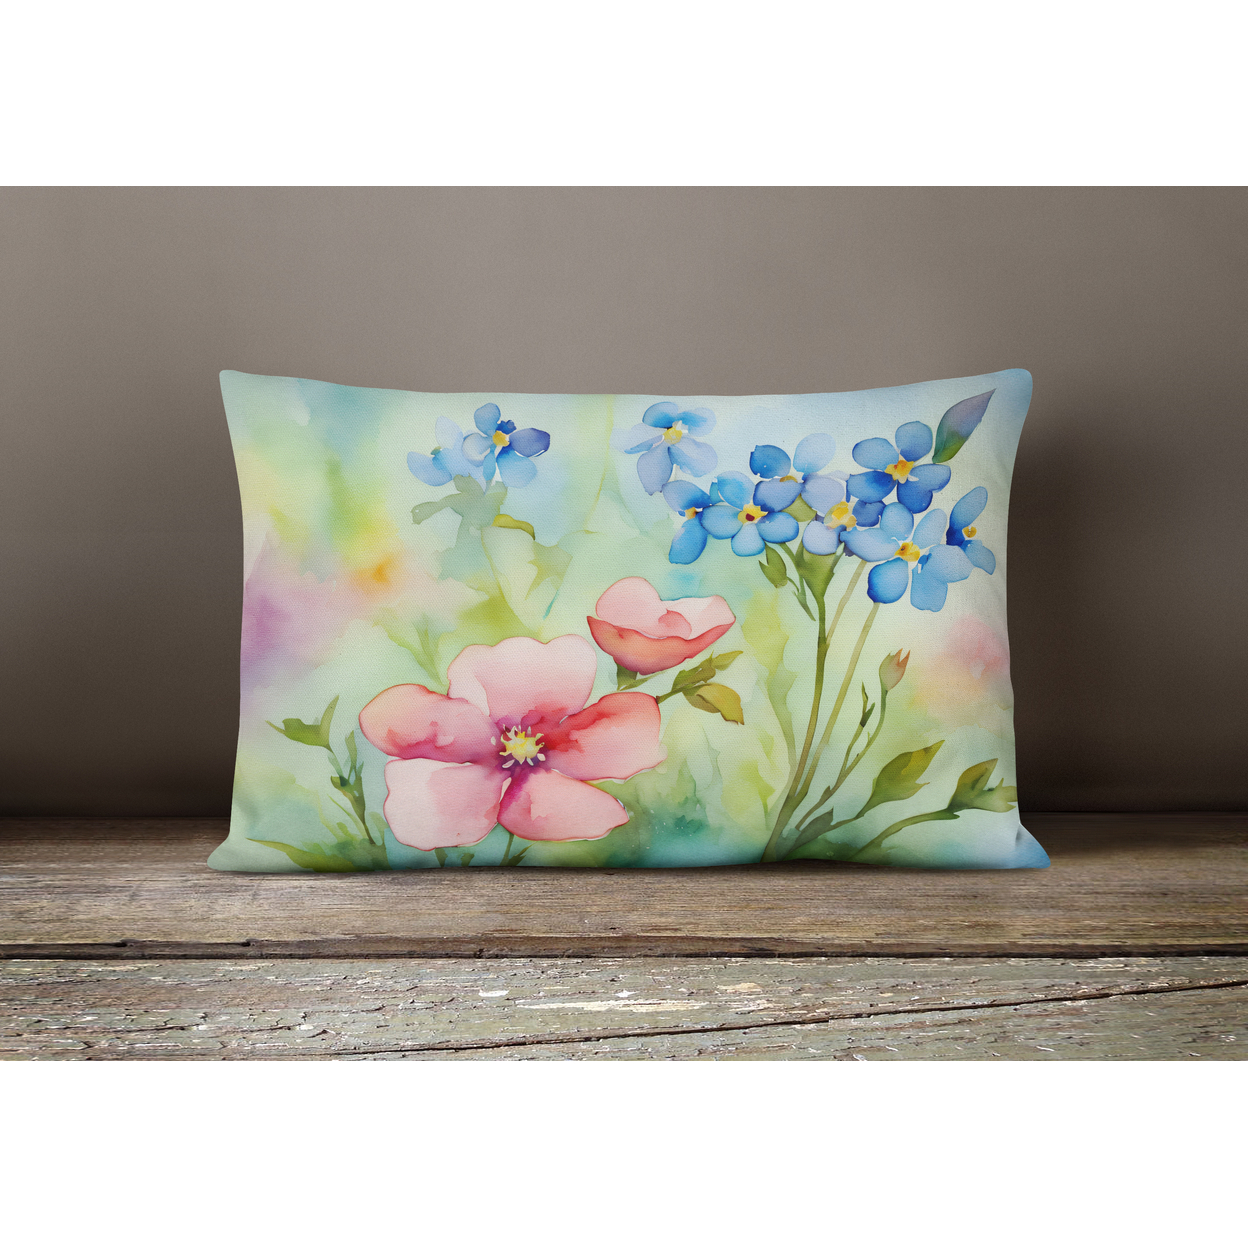 Alaska Forget-me-nots in Watercolor Fabric Decorative Pillow 12 in x 16 in - image 4 of 4